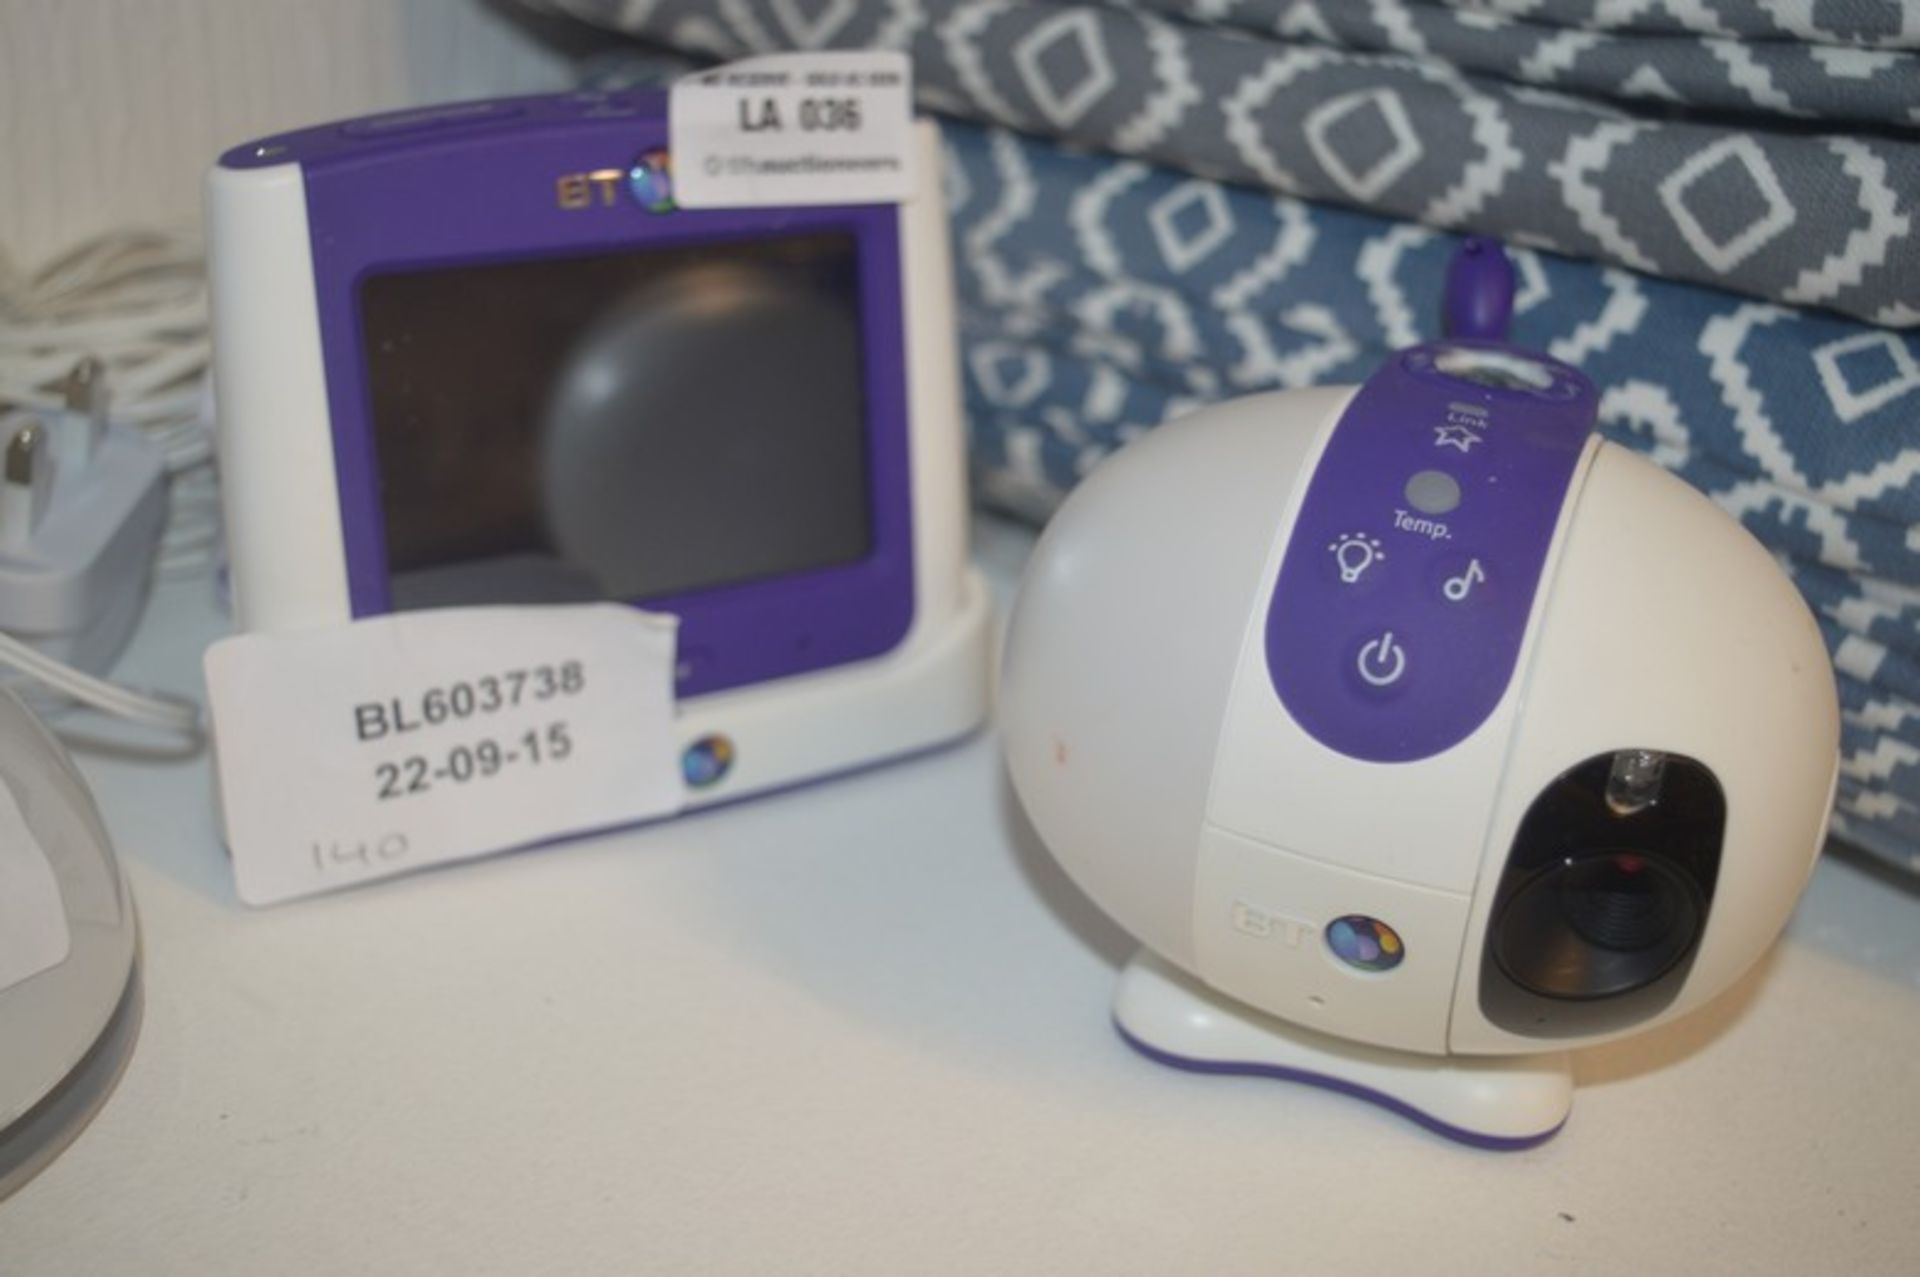 BT VIDEO BABY MONITOR 7500 LIGHT SHOW RRP £140.00  22/09/15